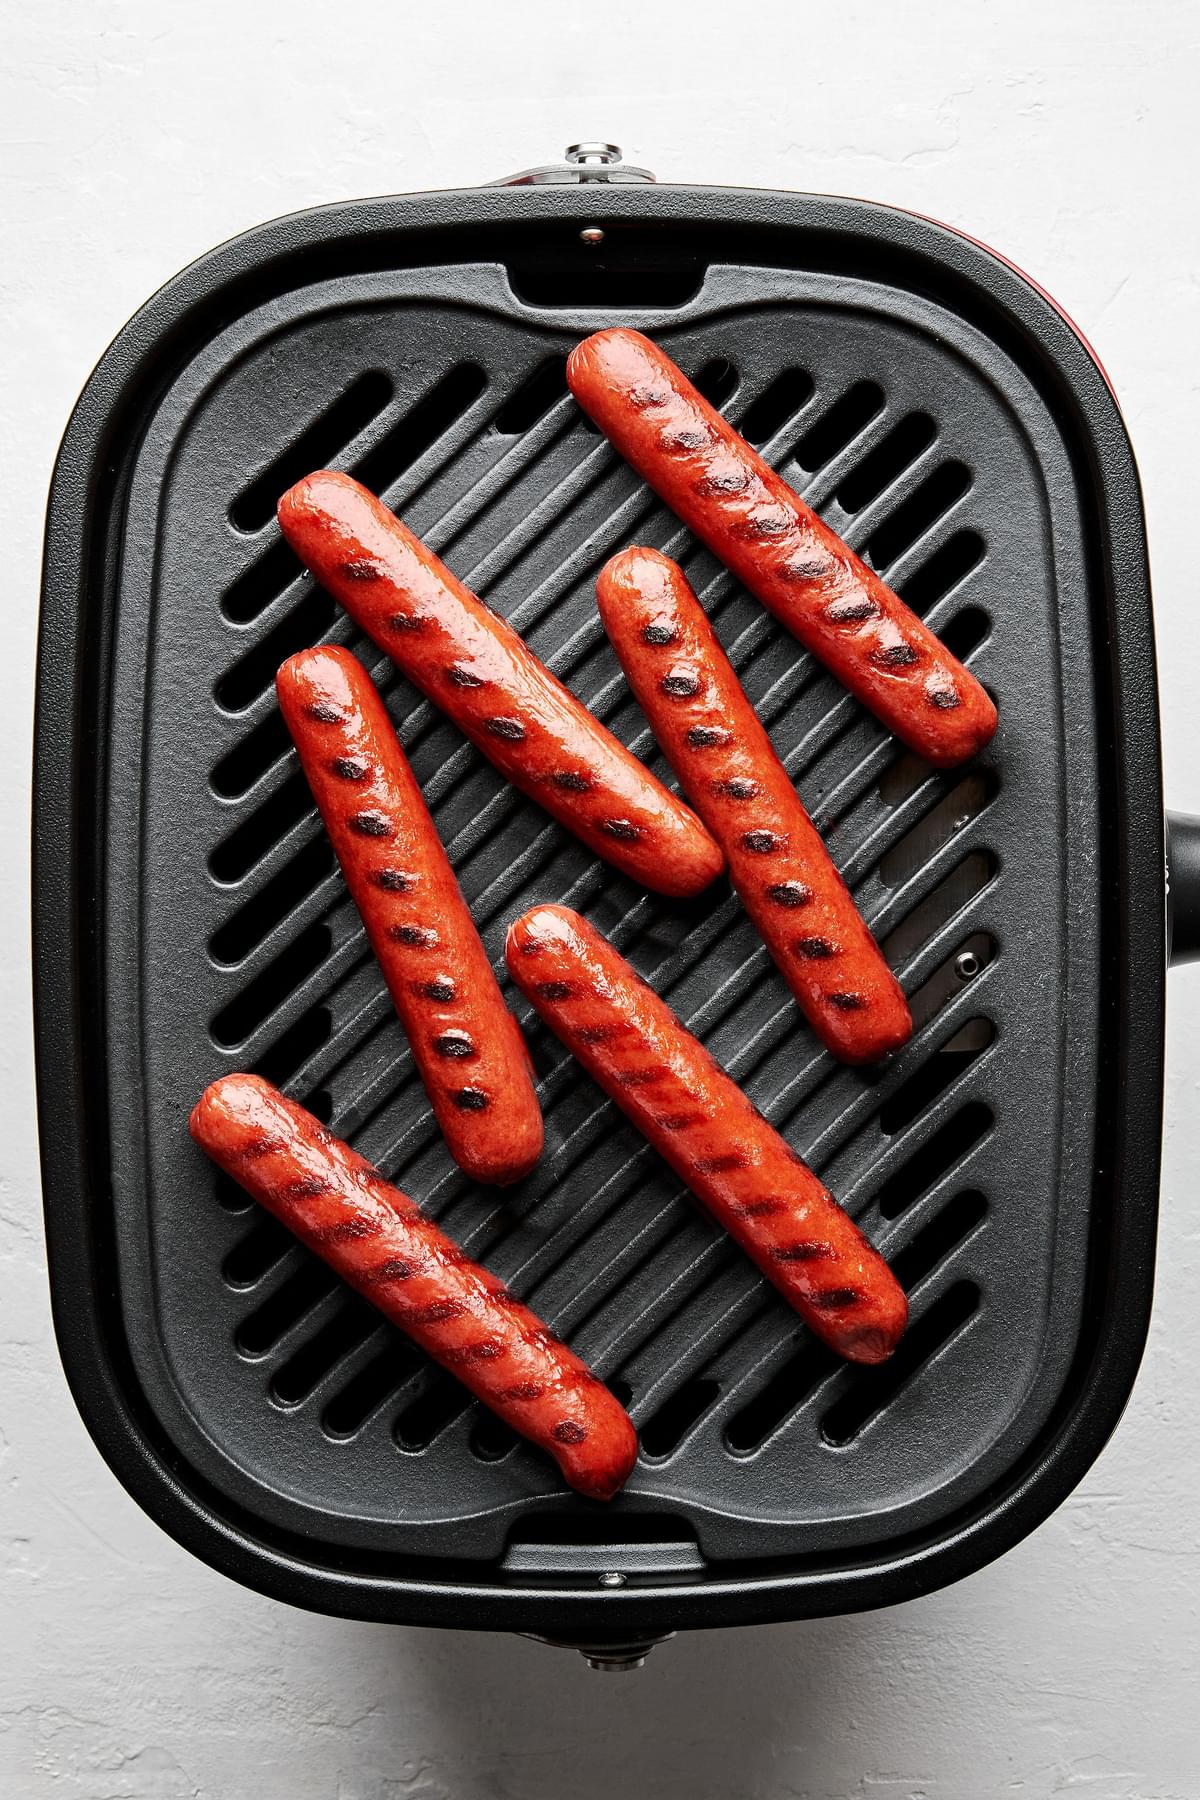 hot dogs cooking on a griddle